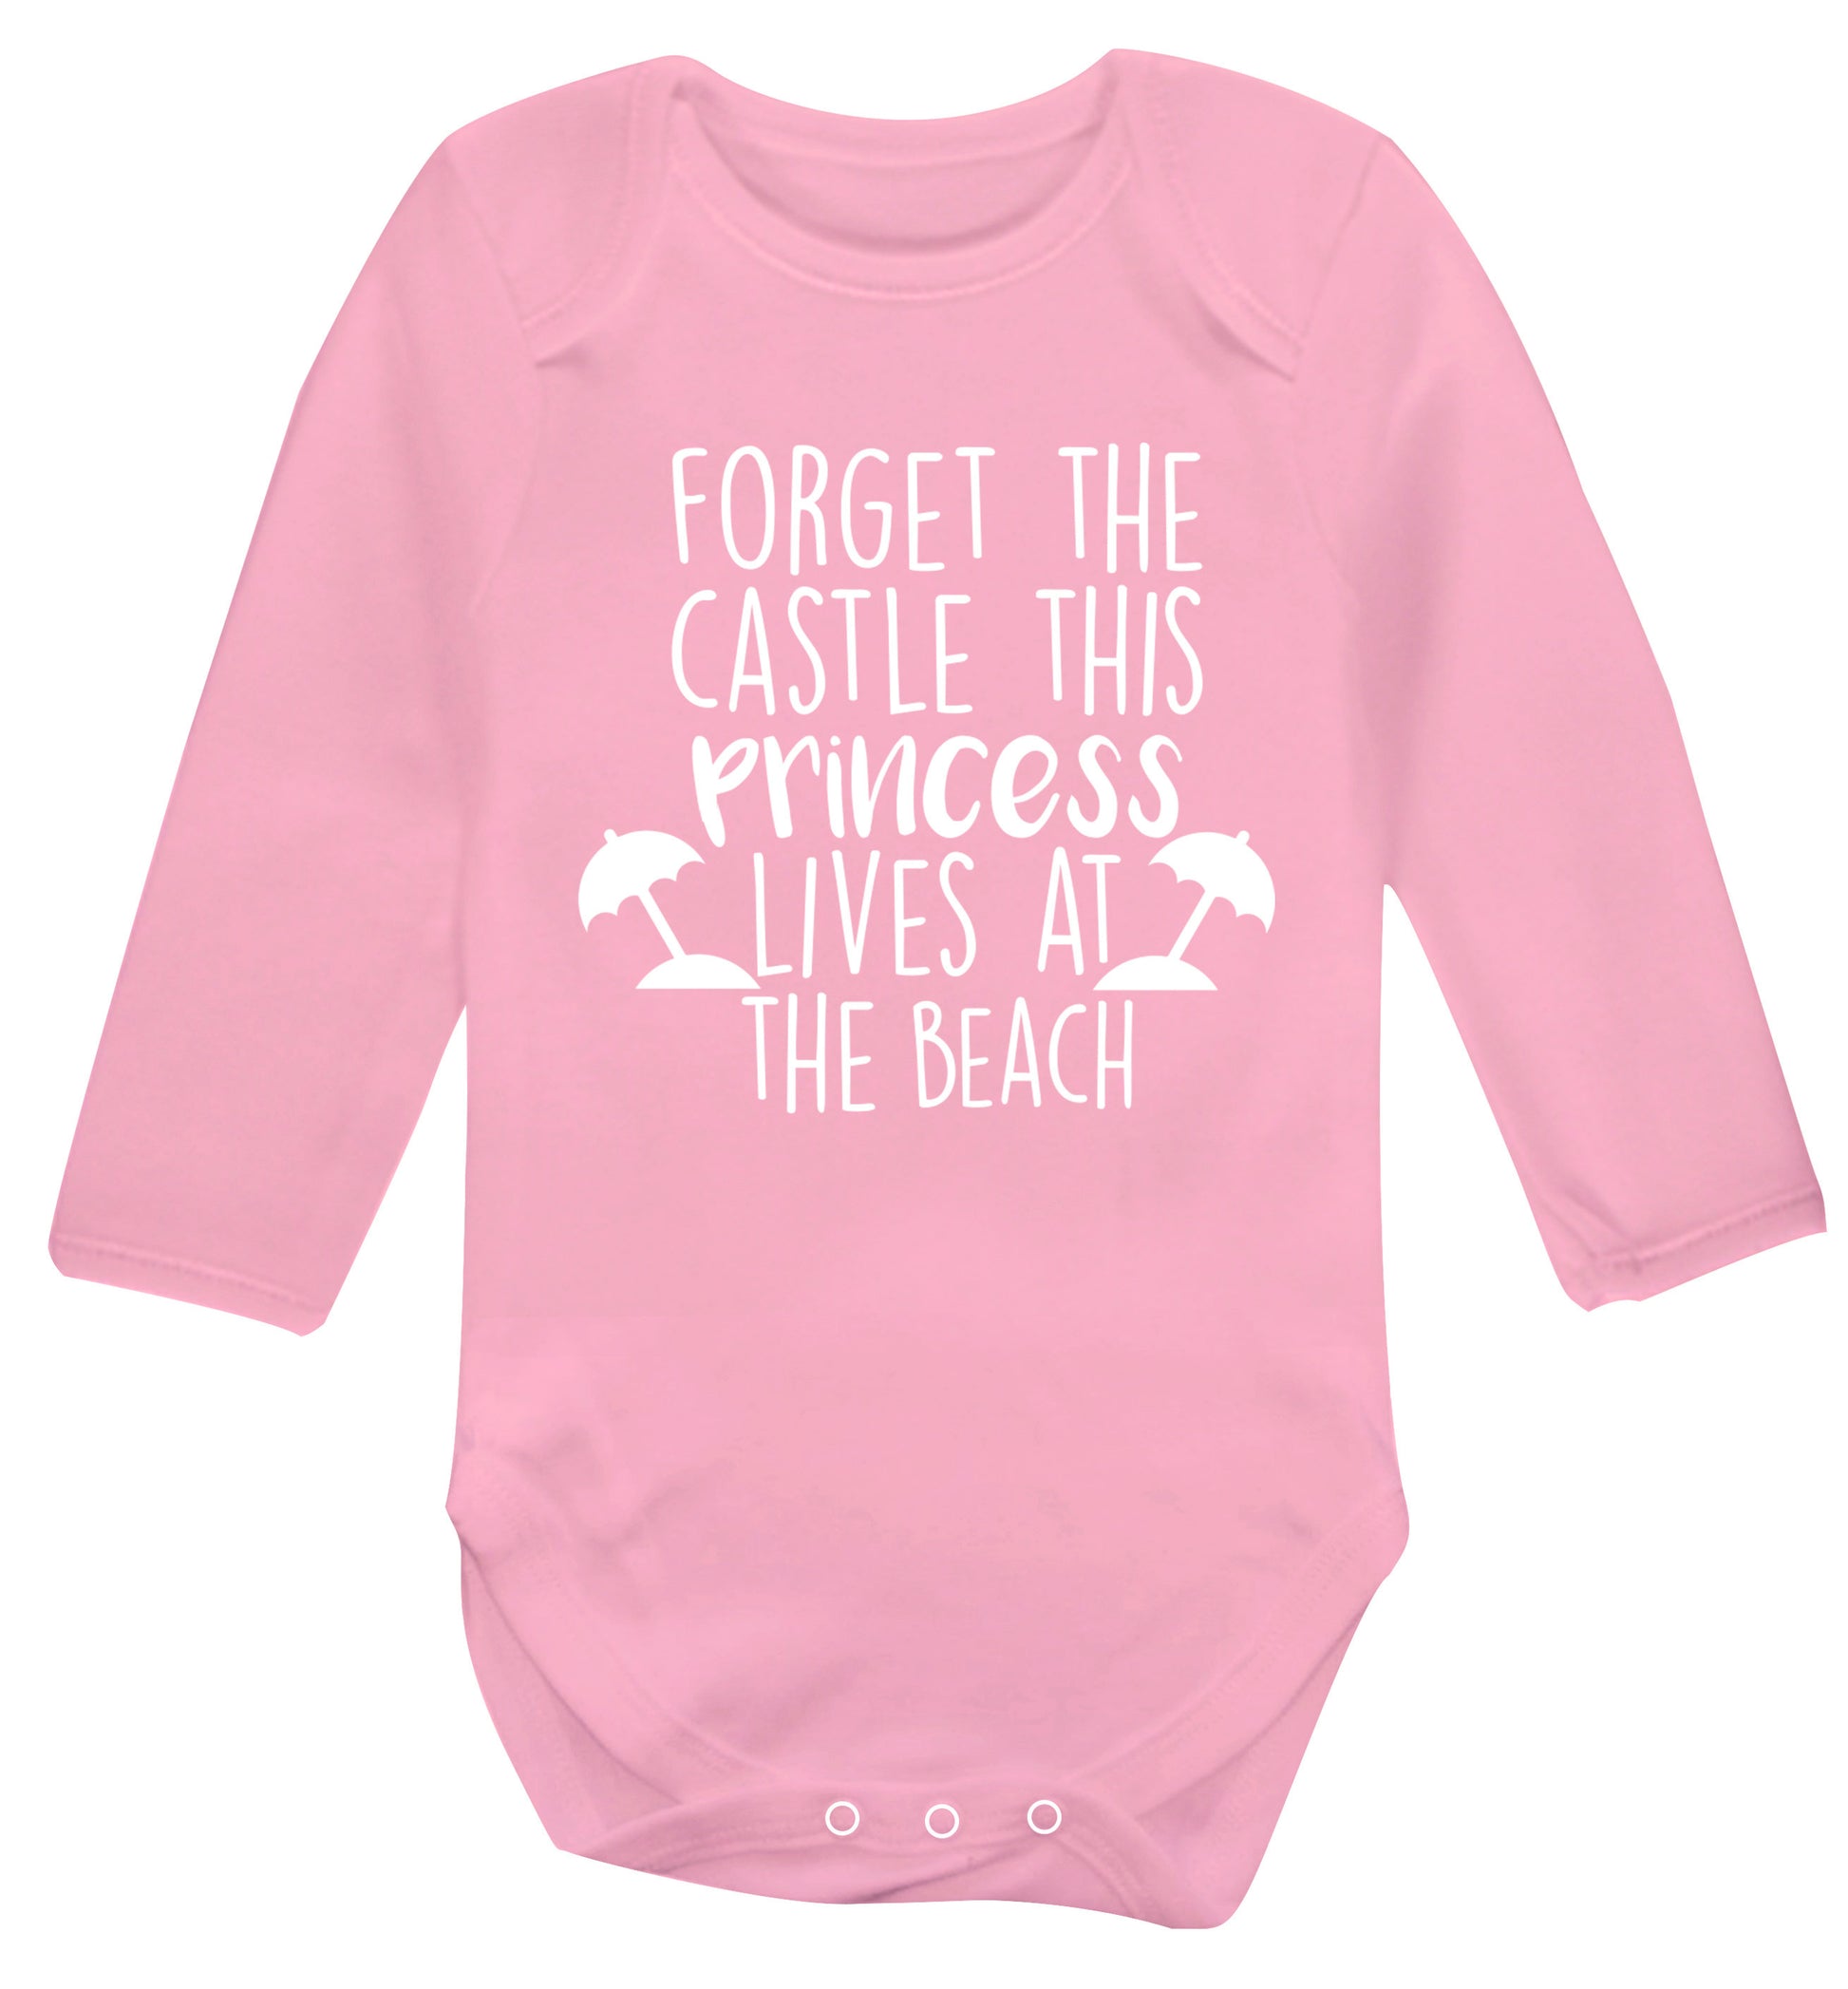 Forget the castle this princess lives at the beach Baby Vest long sleeved pale pink 6-12 months